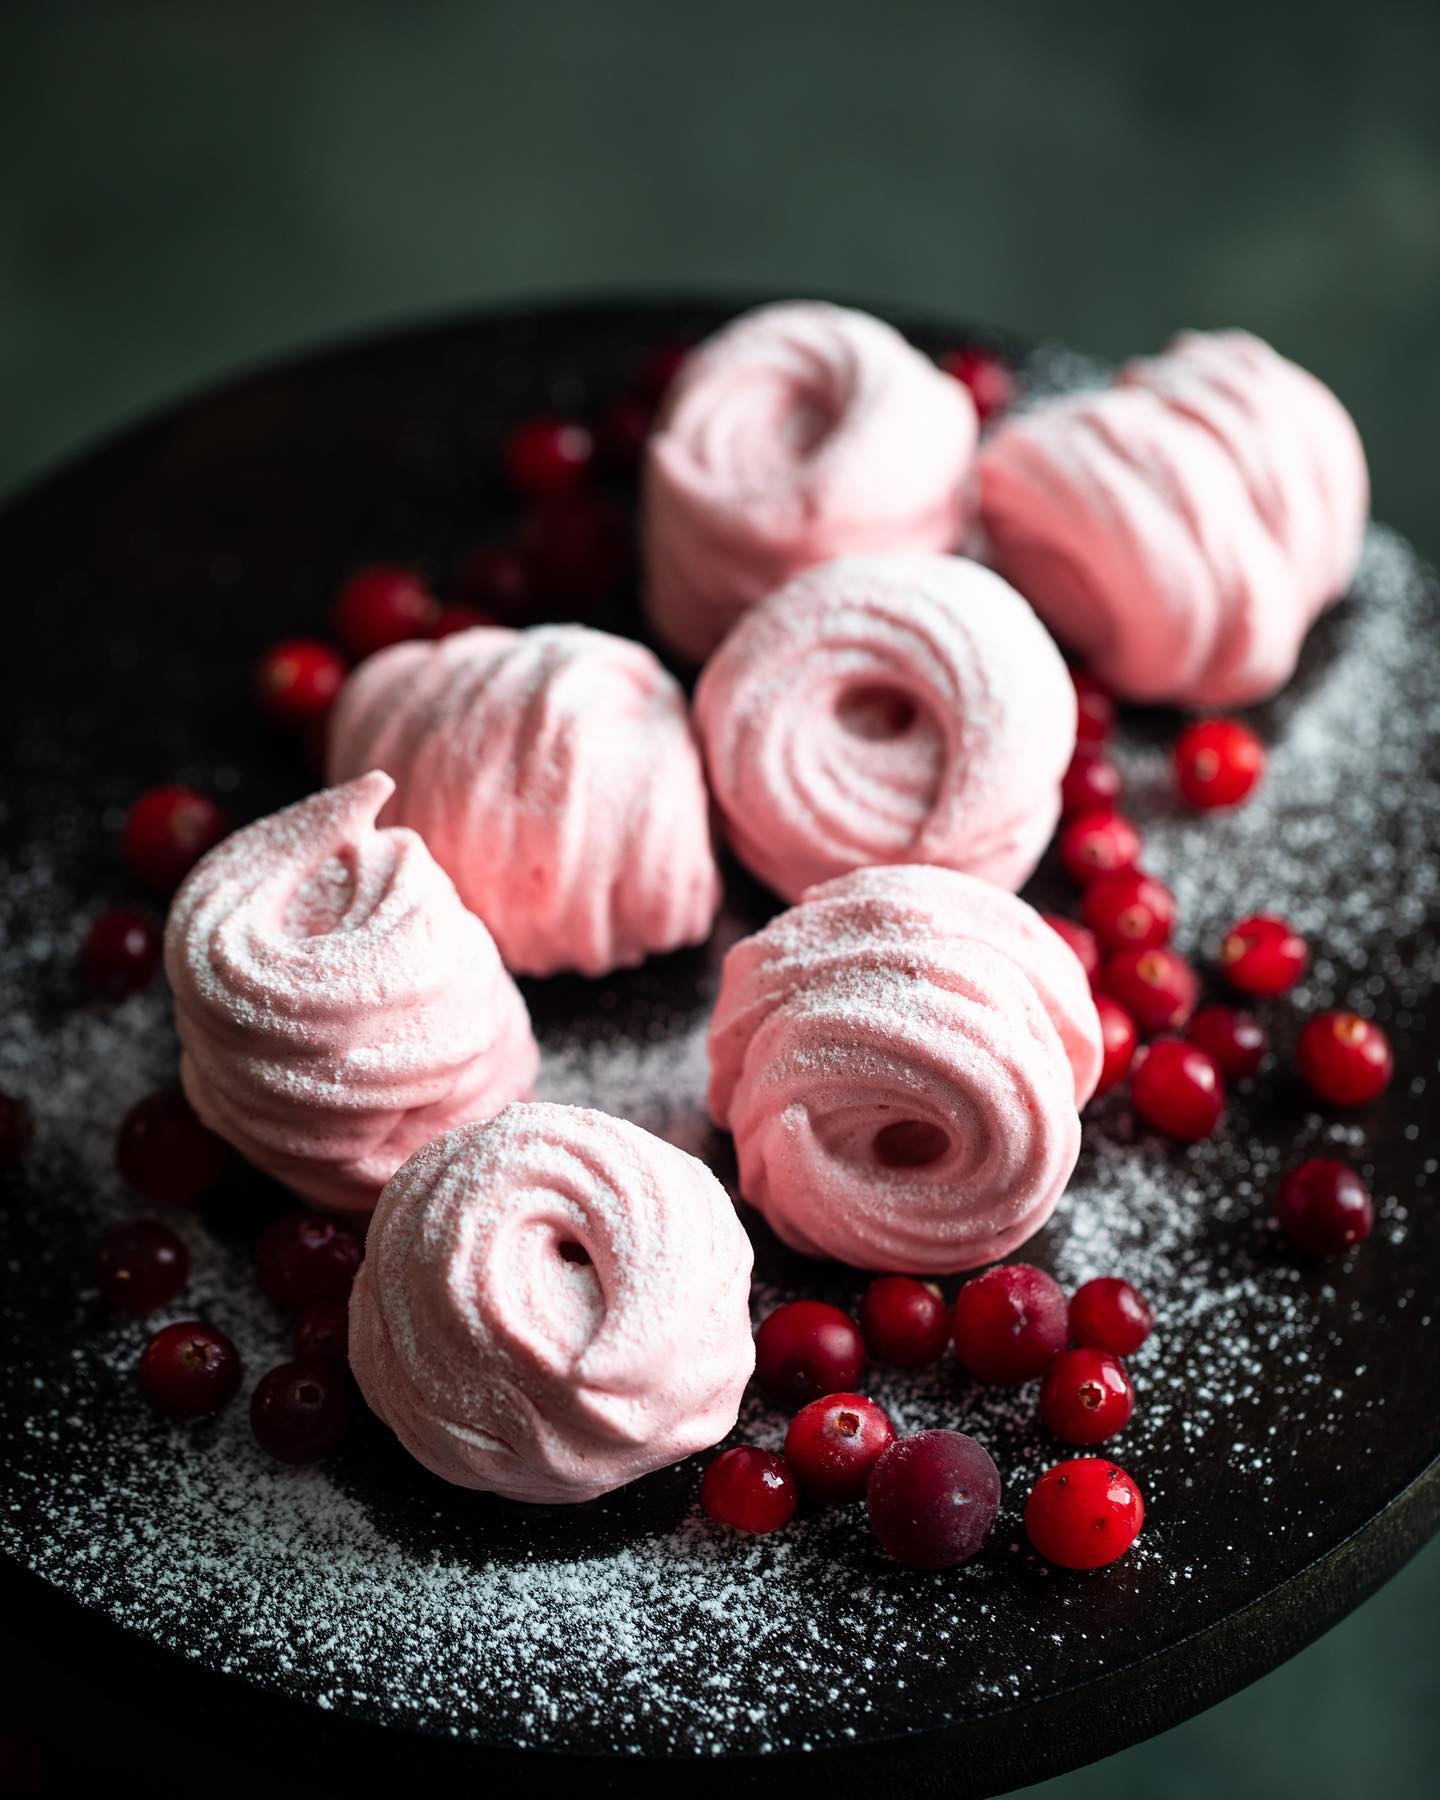 Marshmallow with cranberry puree